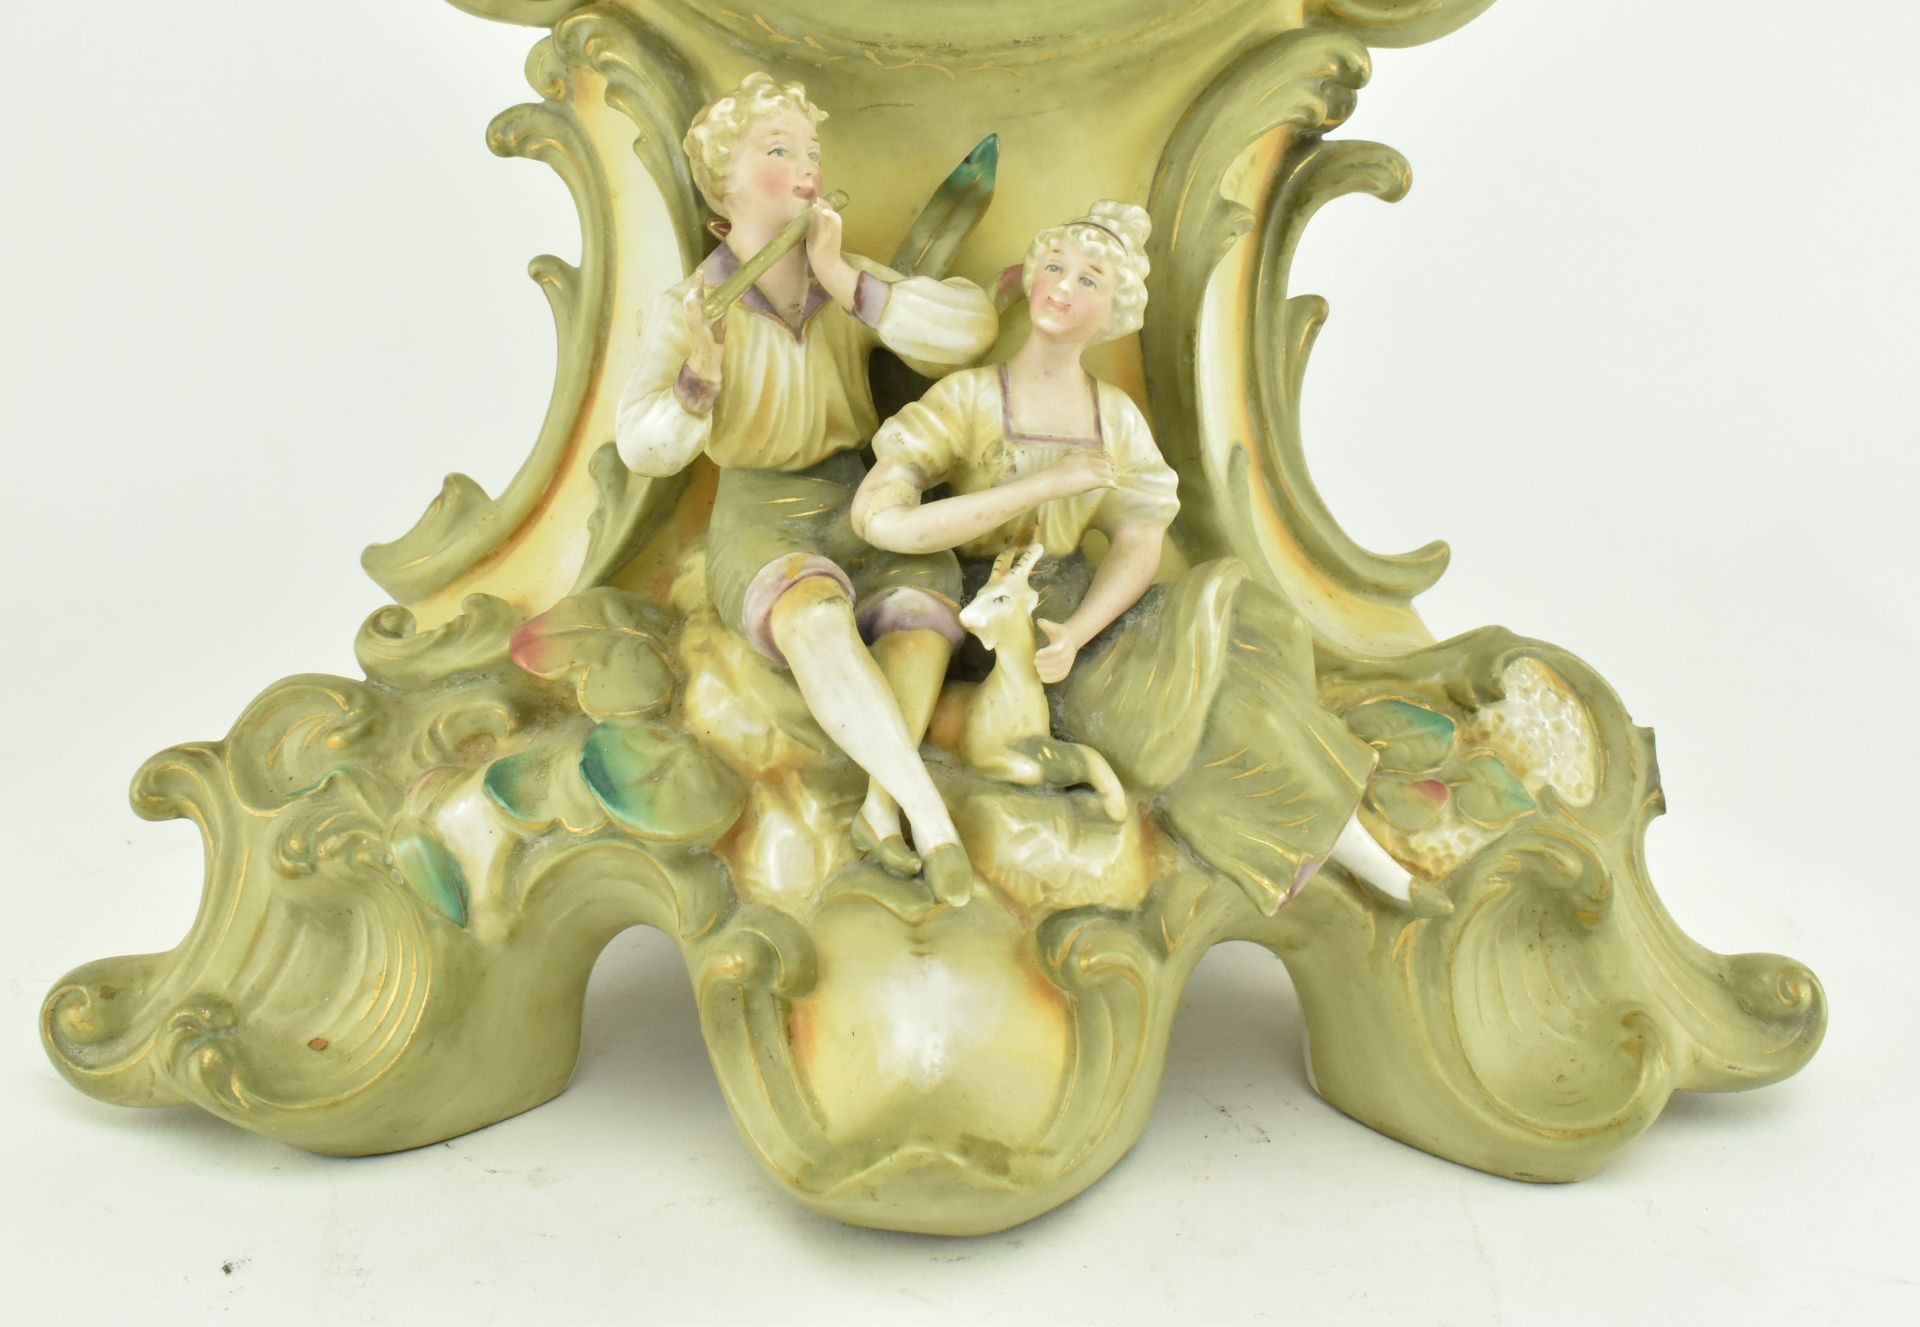 19TH CENTURY CONTINENTAL BISQUE PORCELAIN MANTLE CLOCK - Image 5 of 10